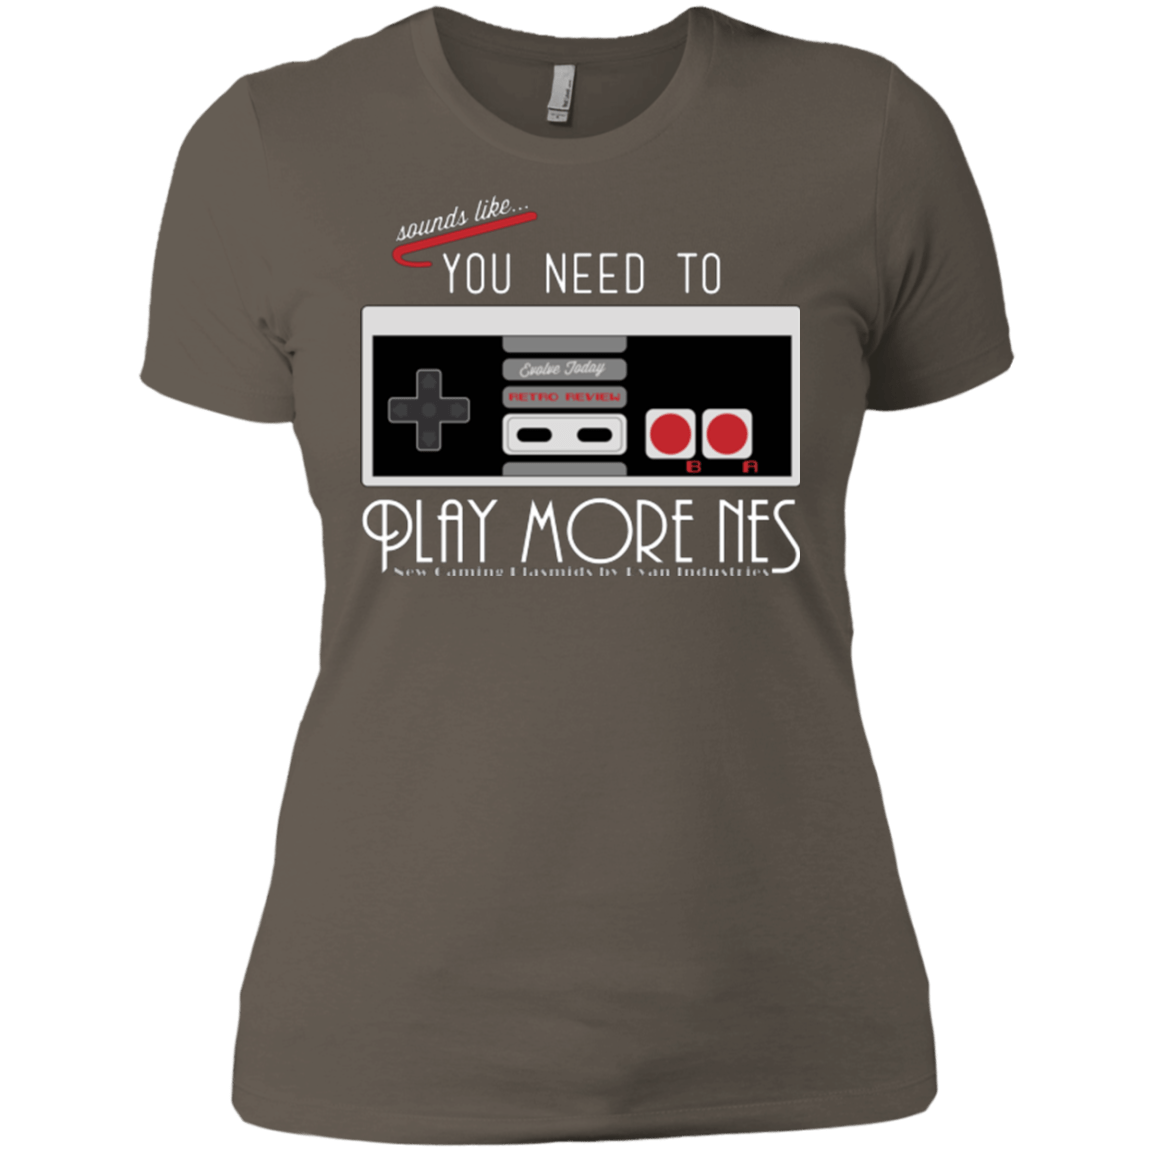 T-Shirts Warm Grey / X-Small Evolve Today! Play More NES Women's Premium T-Shirt